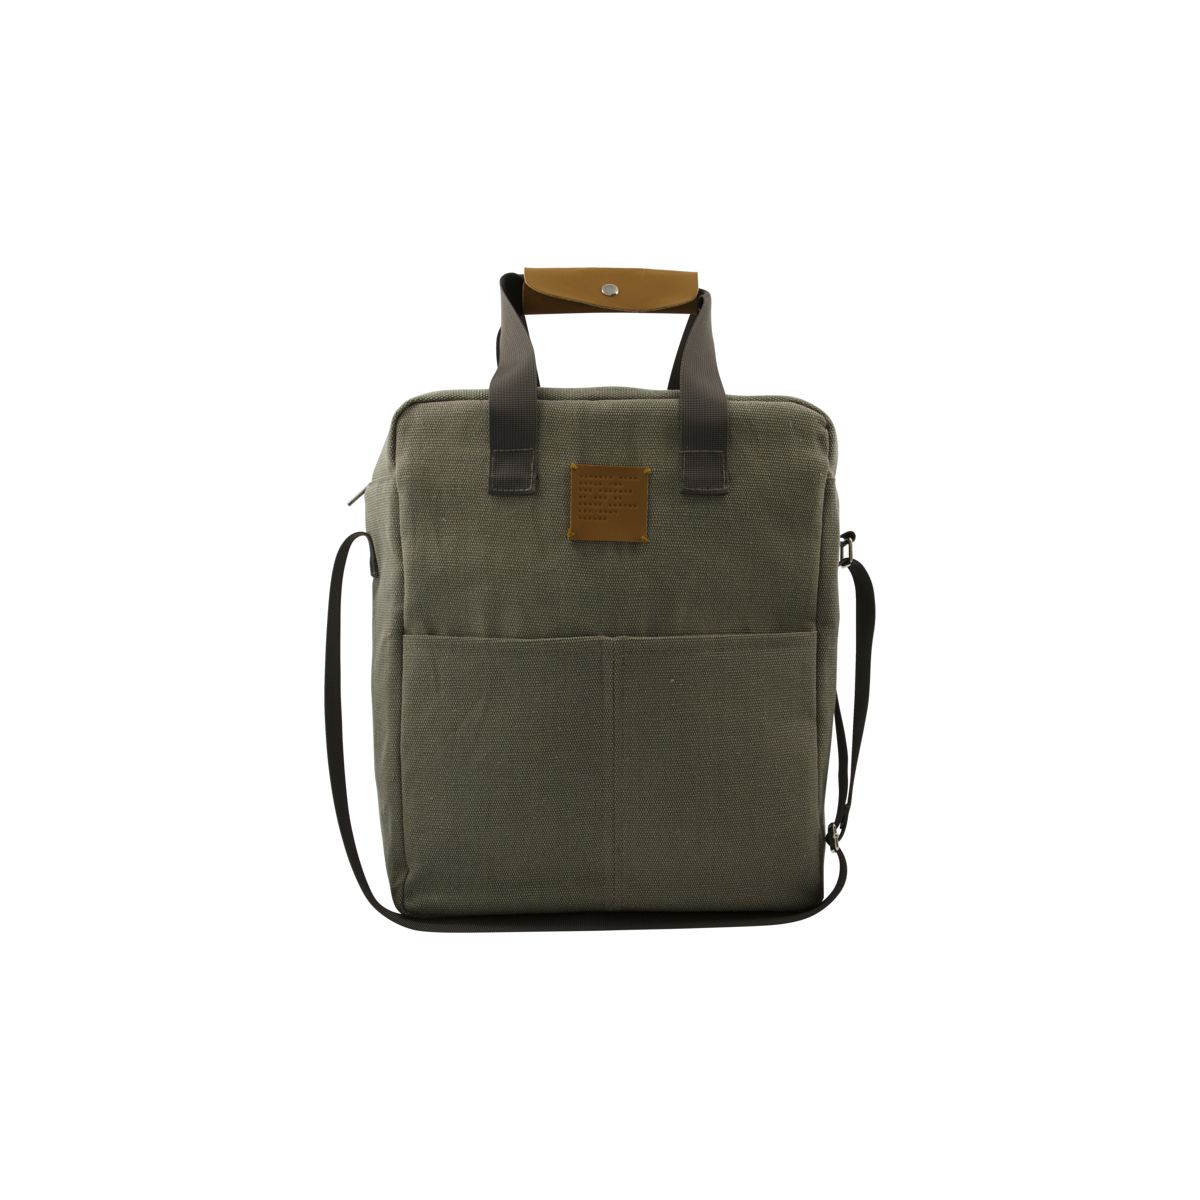 House Doctor Picnic Cooling Bag in Army Green 